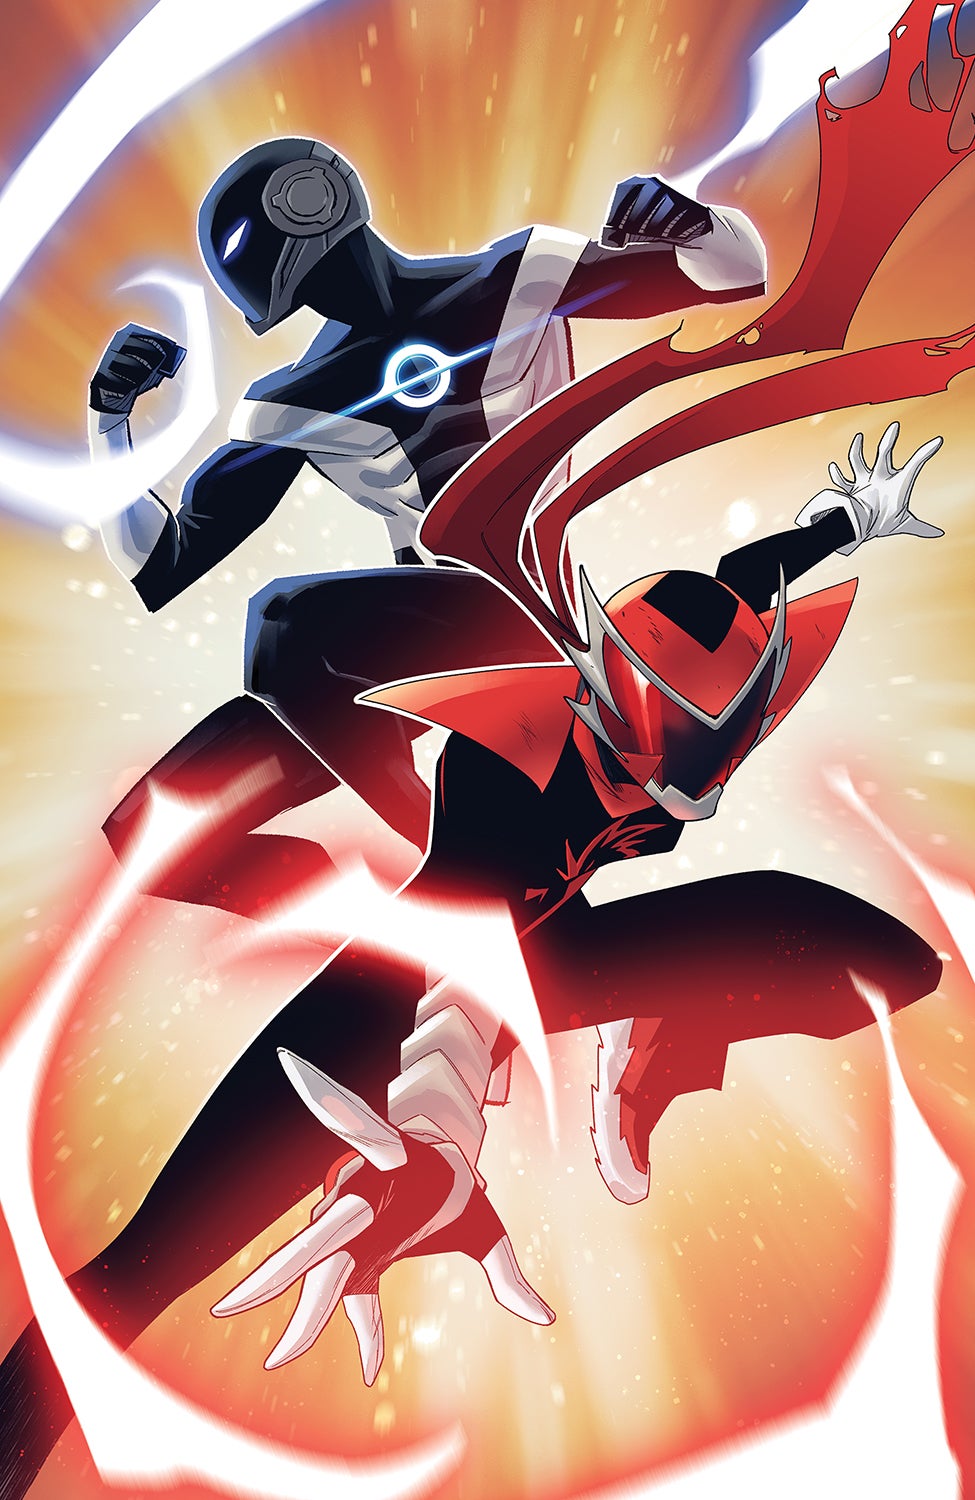 Cover by Marcelo Costa and Erica D'Urso. (Image: Image Comics)